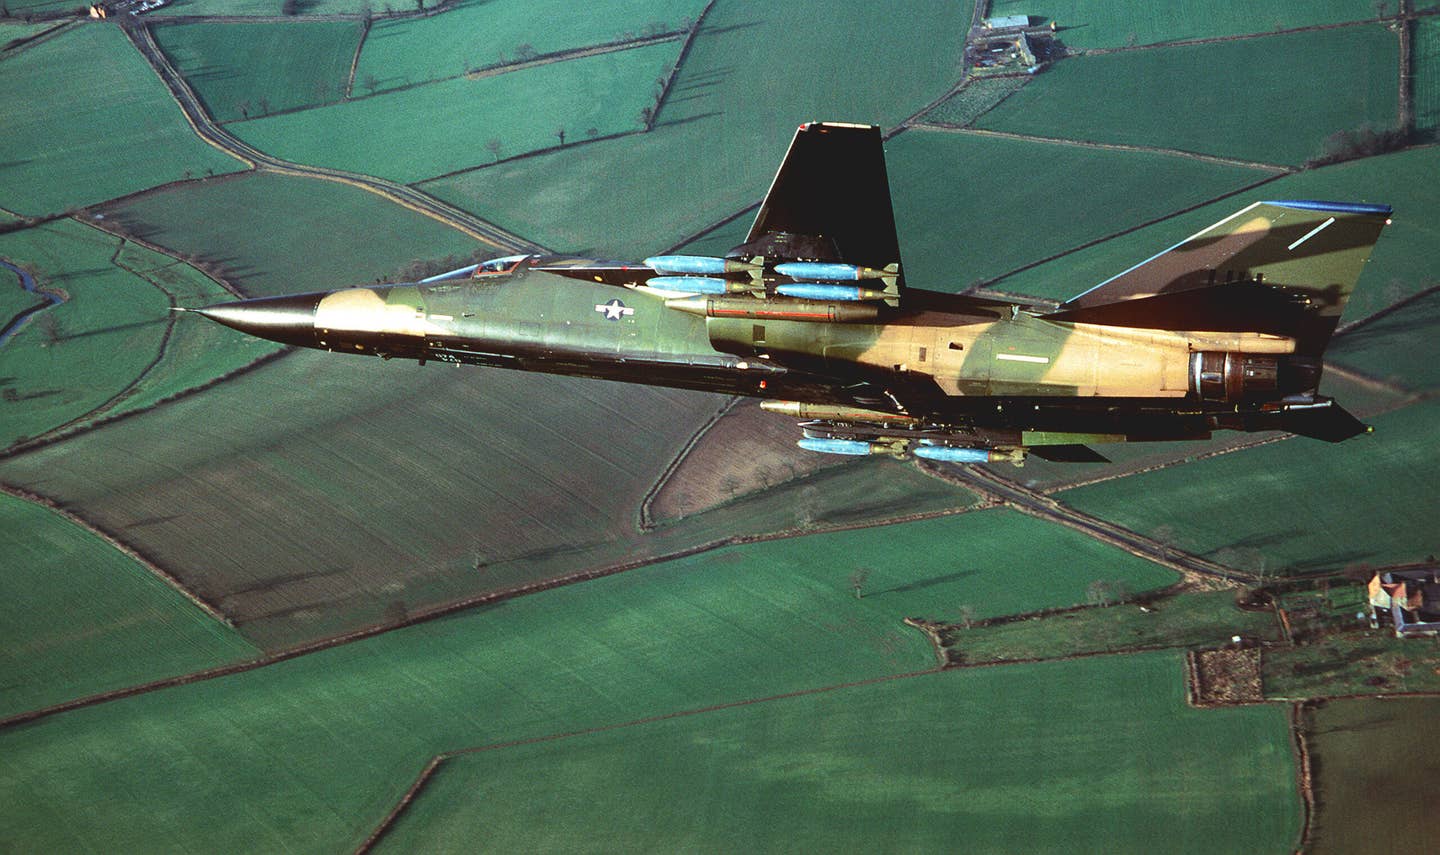 An air-to-air view of an F-111 flown by the 20th Tactical Fighter Wing at RAF Upper Heyford carrying a full load of bombs on its wing pylons, circa 1983. <em>U.S. Air Force</em>